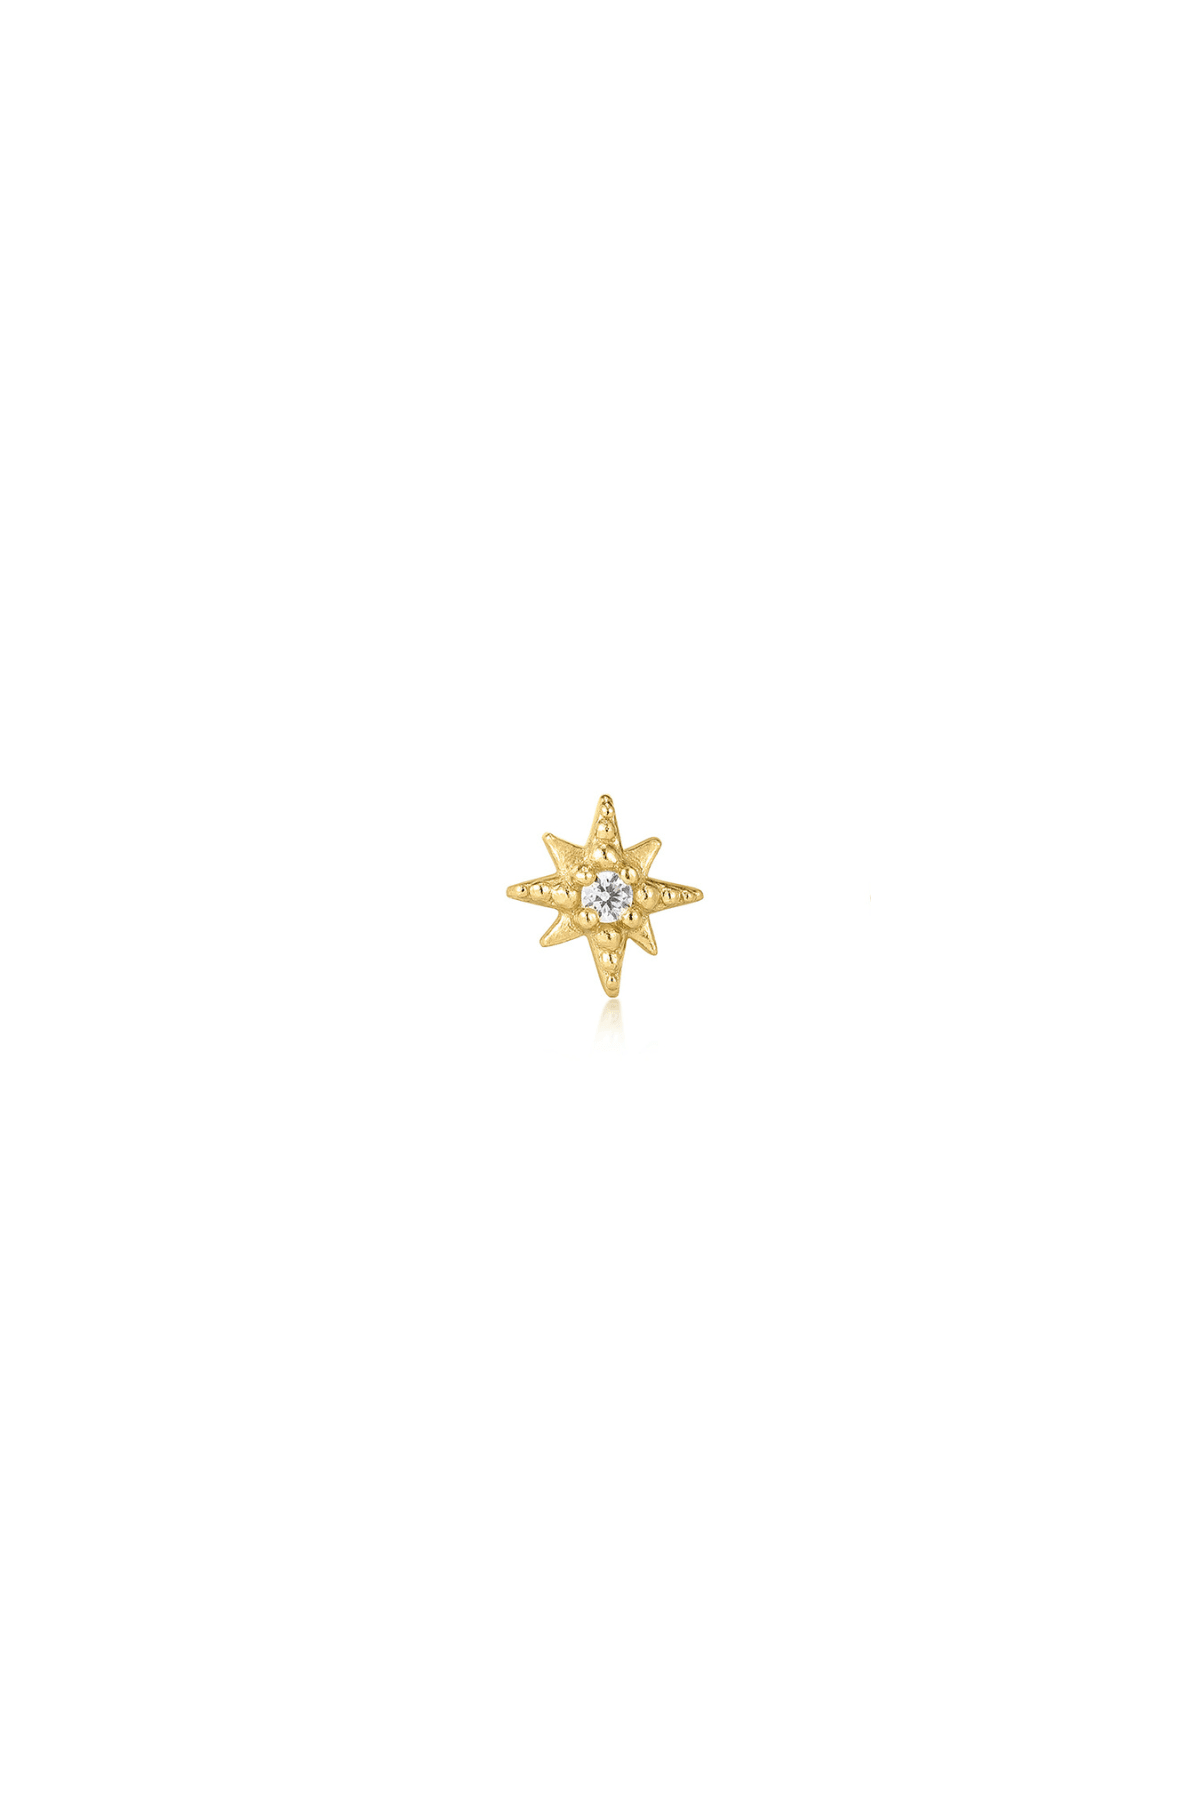 The Wishing Star 14ct Gold Vermeil Stud Earring (Single) - Molten Store